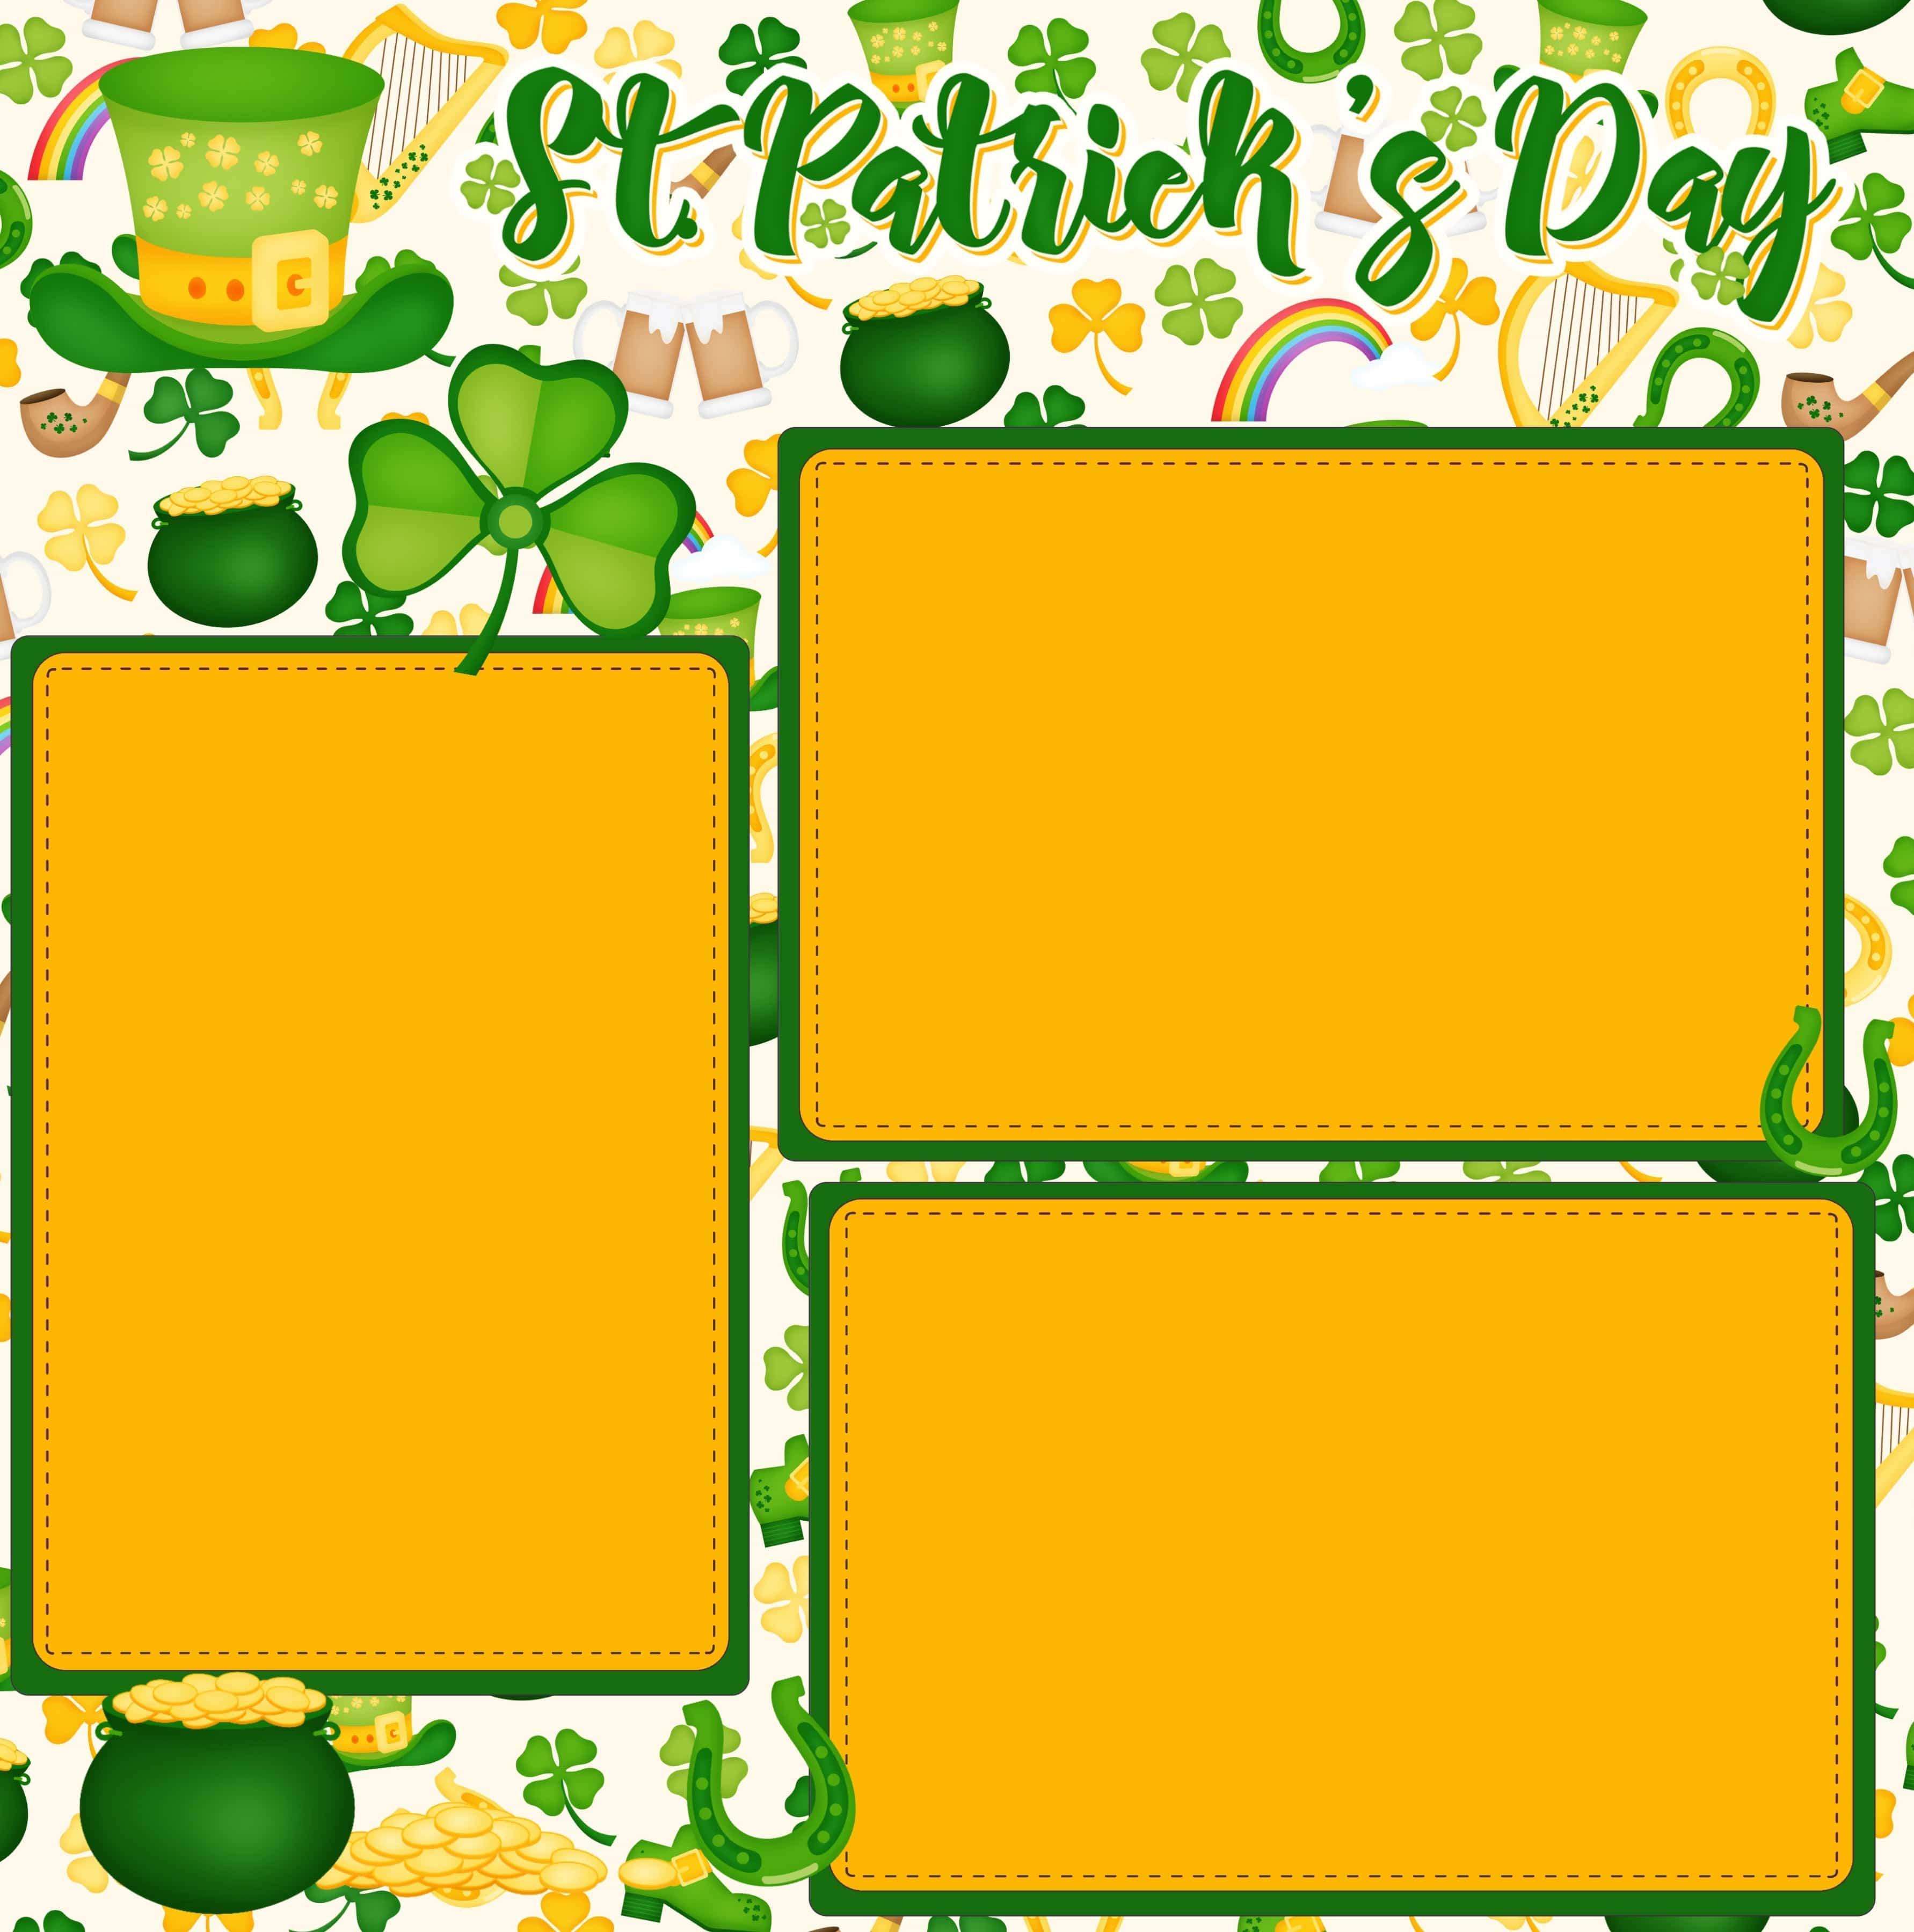 Irish Luck Collection St. Patrick's Day (2) - 12 x 12 Premade, Printed Scrapbook Pages by SSC Designs - Scrapbook Supply Companies